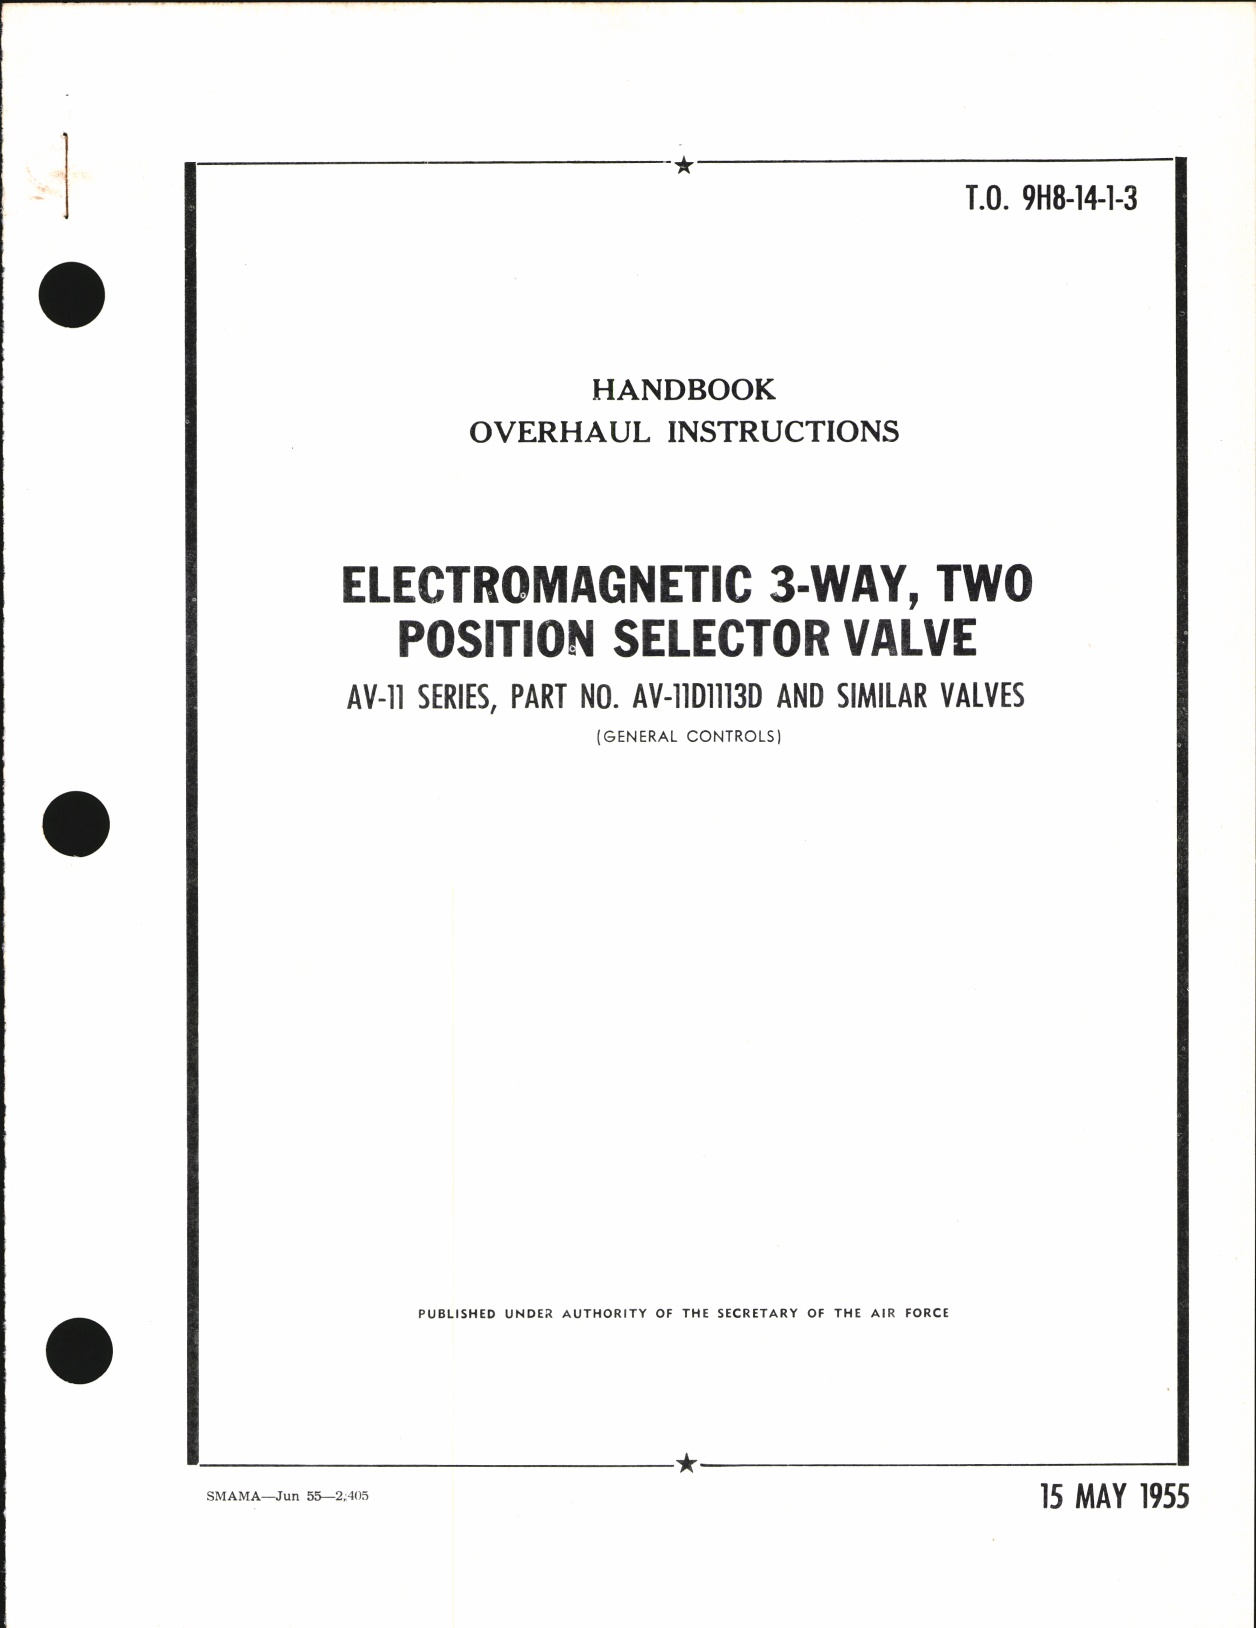 Sample page 1 from AirCorps Library document: Handbook of Overhaul Instructions for Electro Magnetic 3-way, Two Position Selector Valve